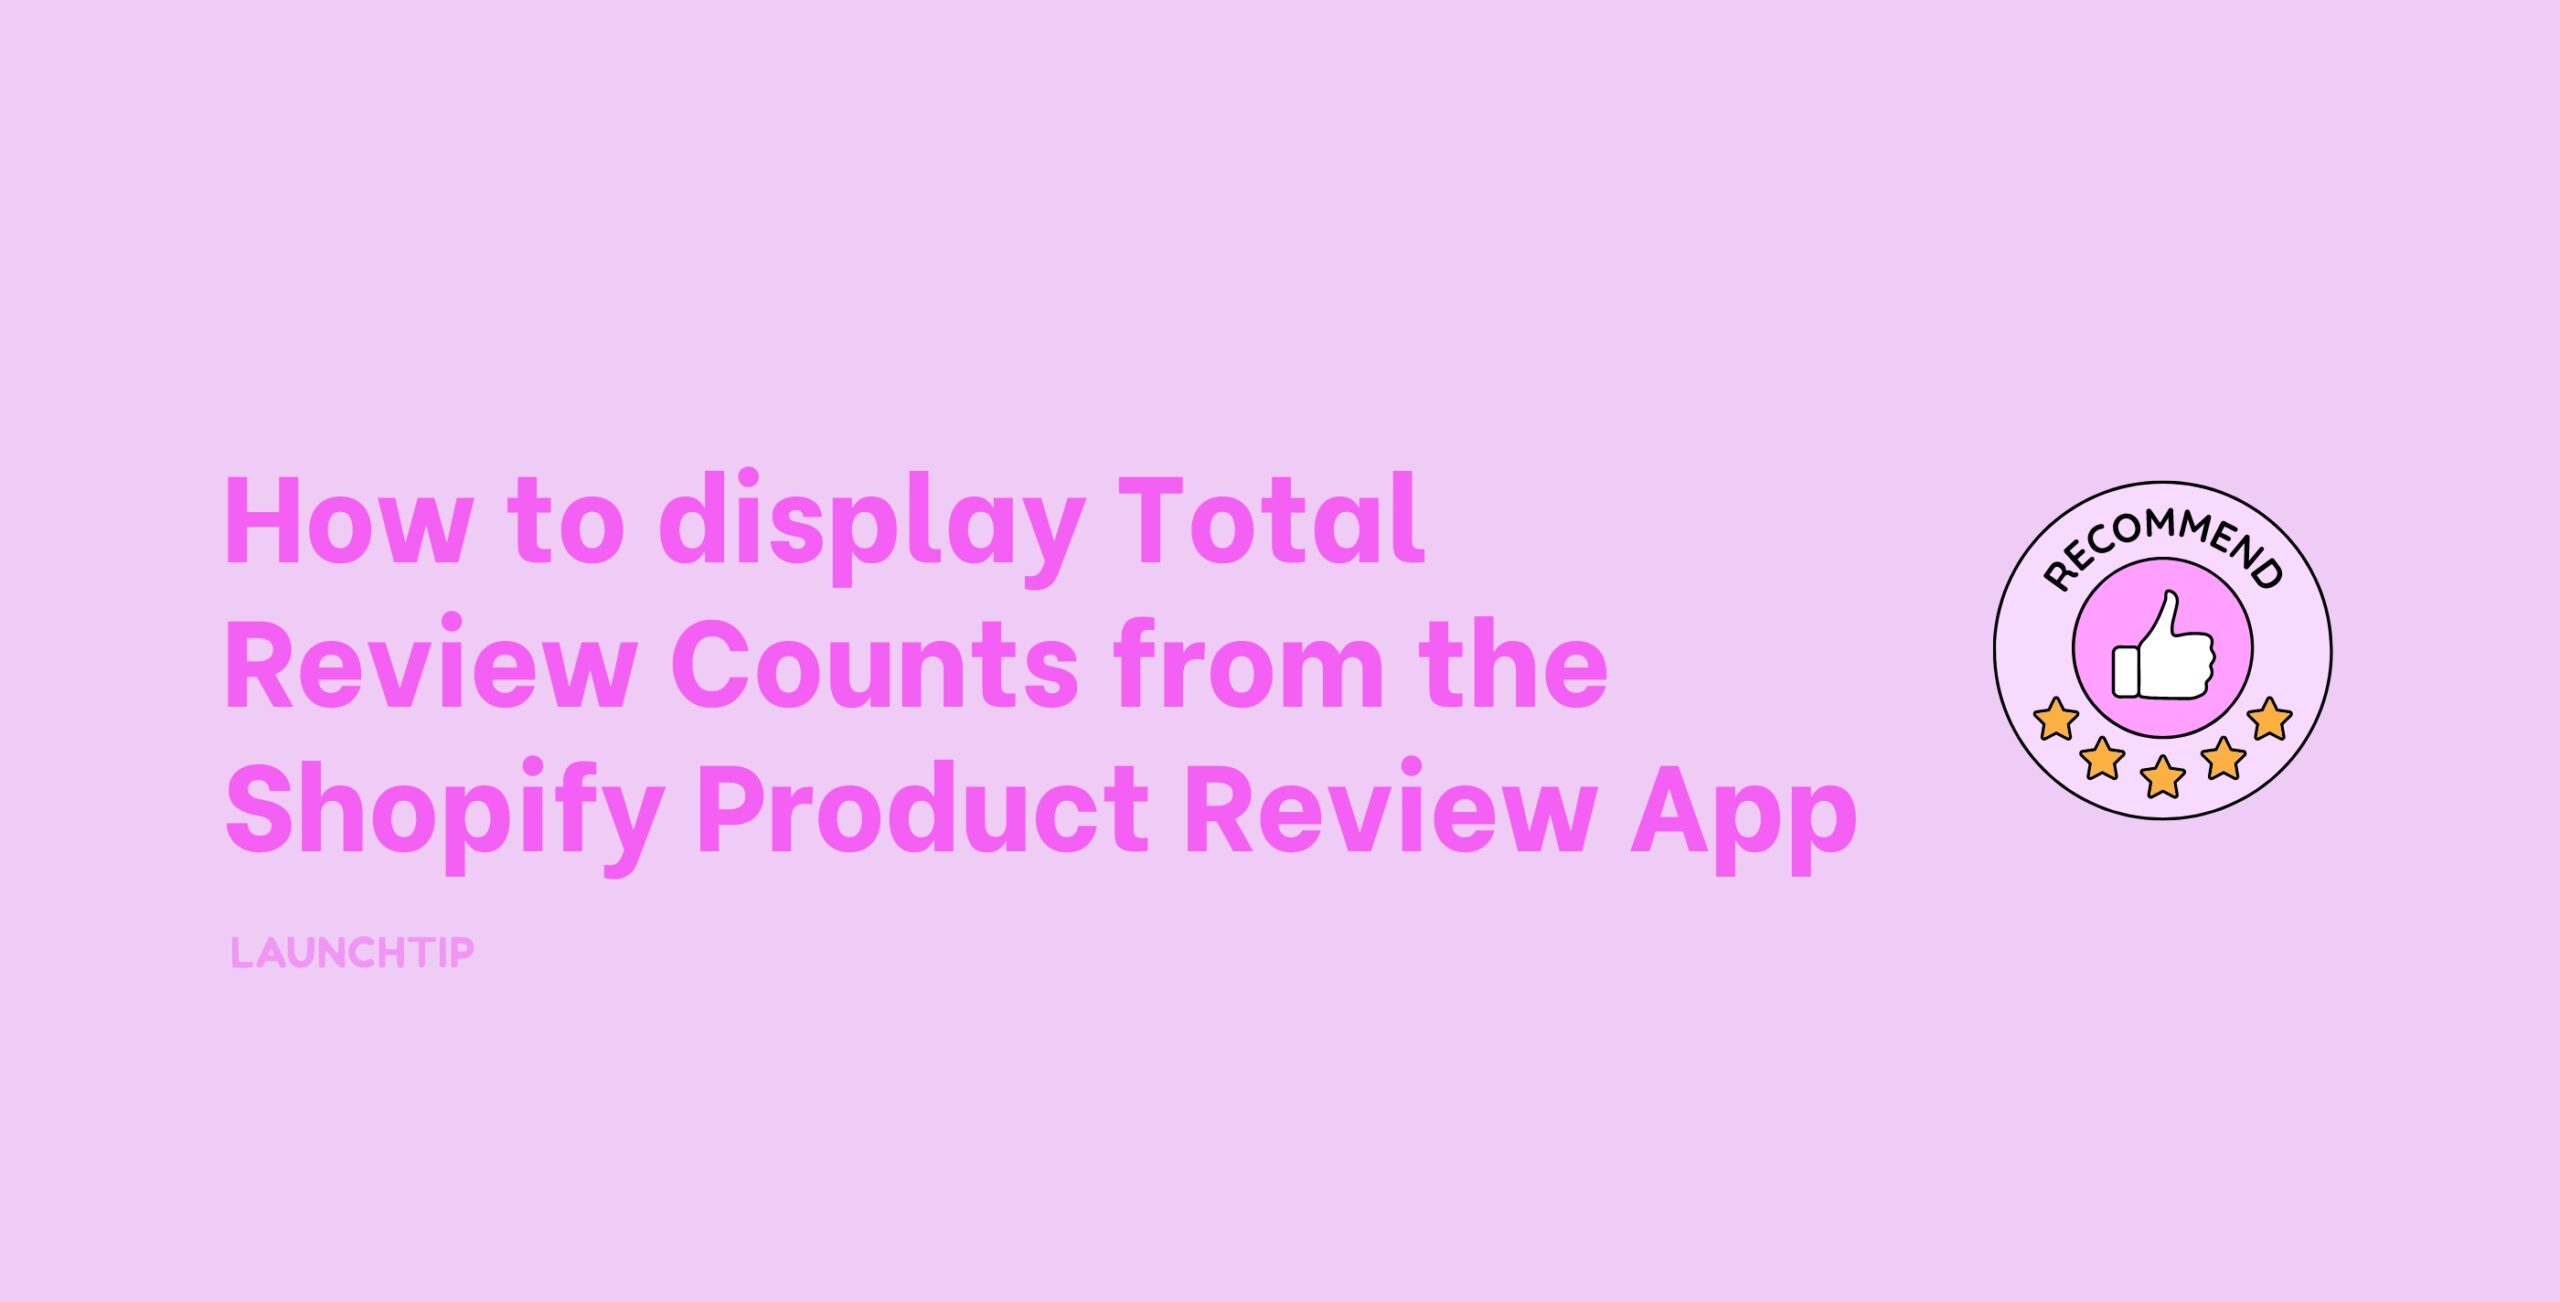 How to display Total Review Counts from the Shopify Product Review App